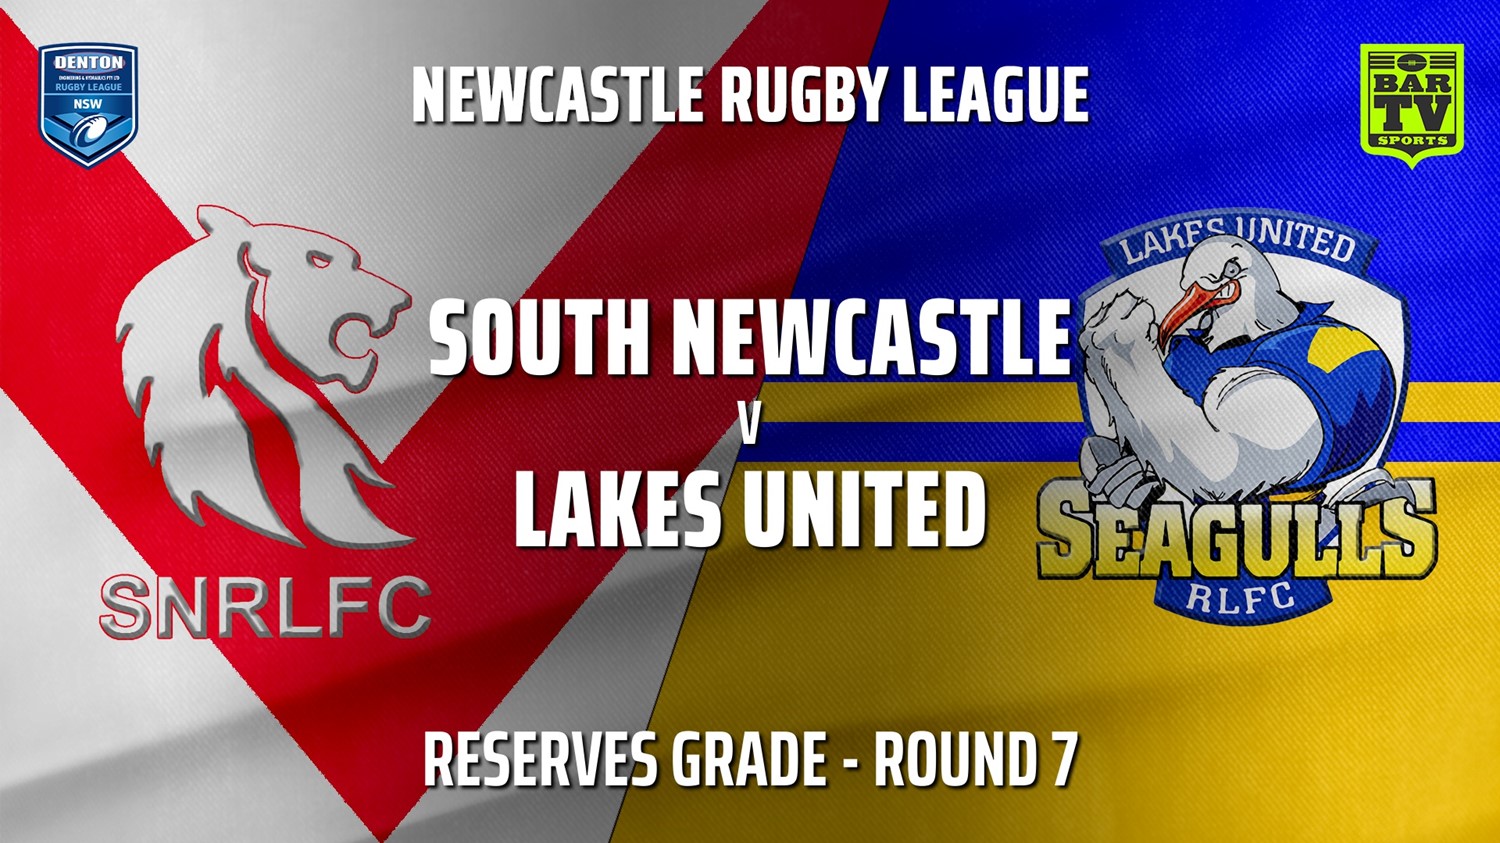 210508-Newcastle Rugby League Round 7 - Reserves Grade - South Newcastle v Lakes United Slate Image